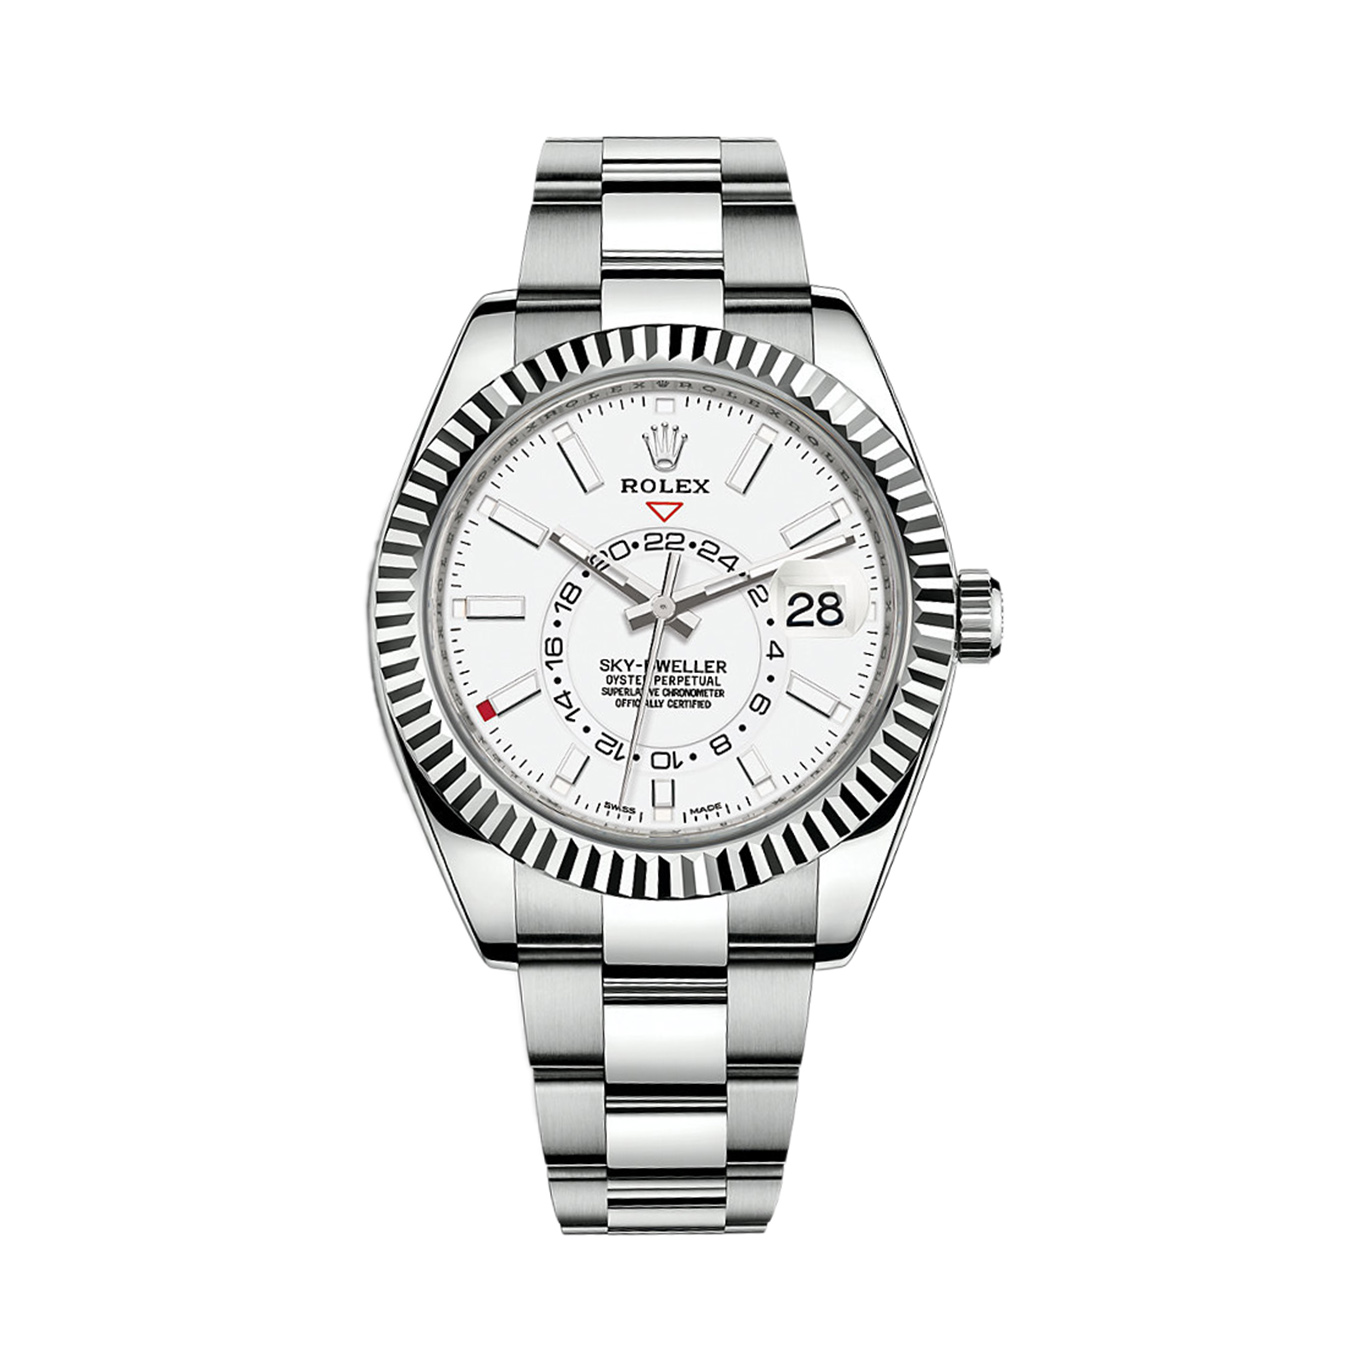 Sky-Dweller 326934 White Gold & Stainless Steel Watch (White)